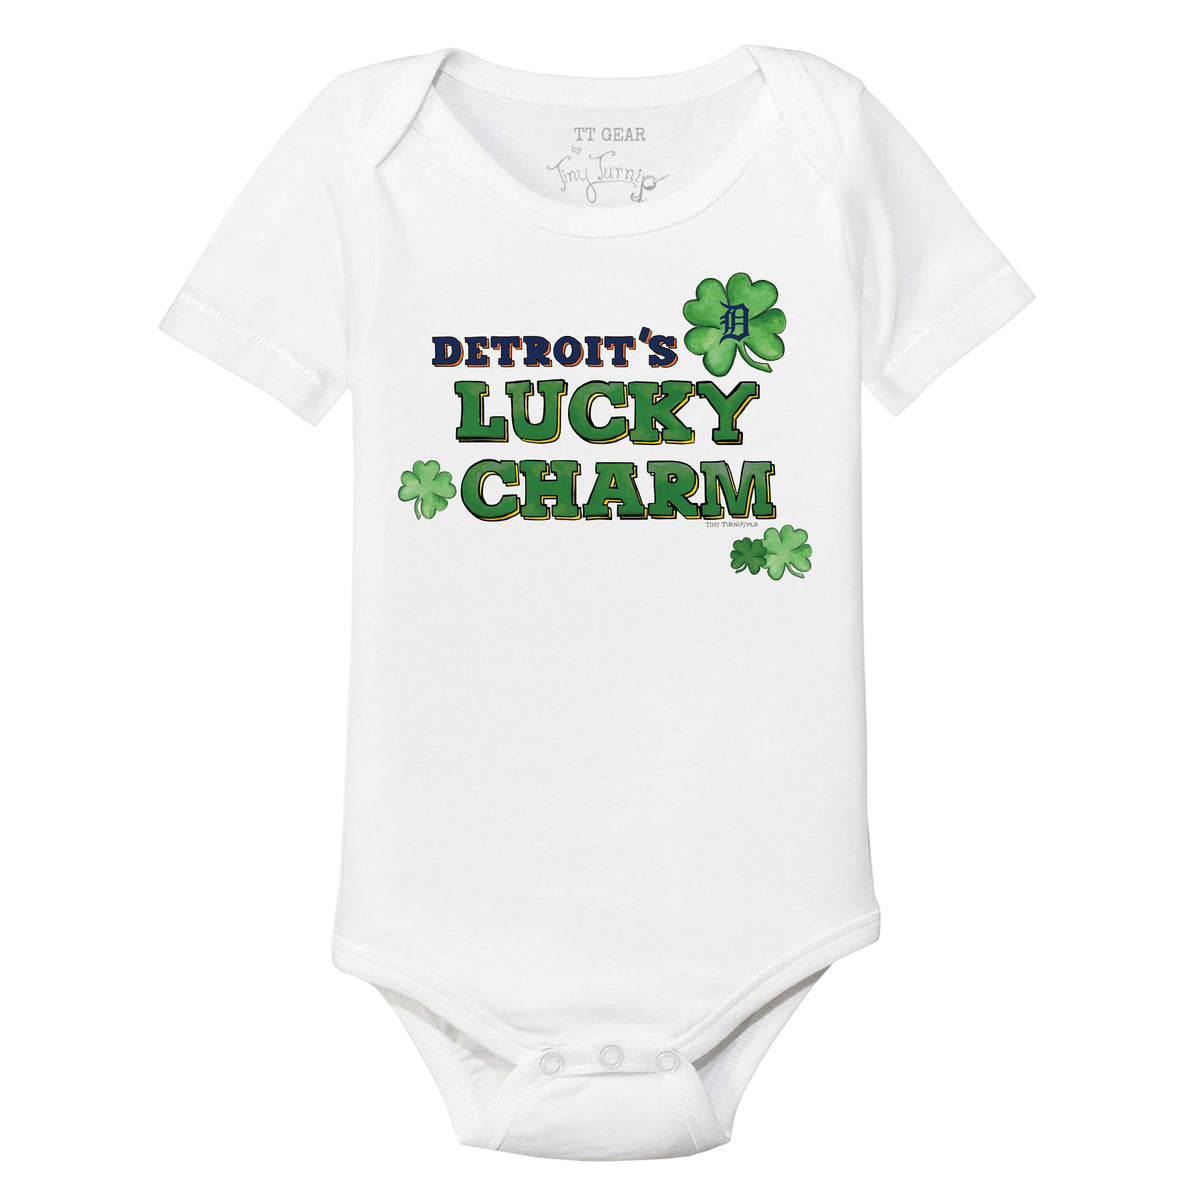 St. Louis Cardinals Tiny Turnip Toddler Lucky Charm T-Shirt - White